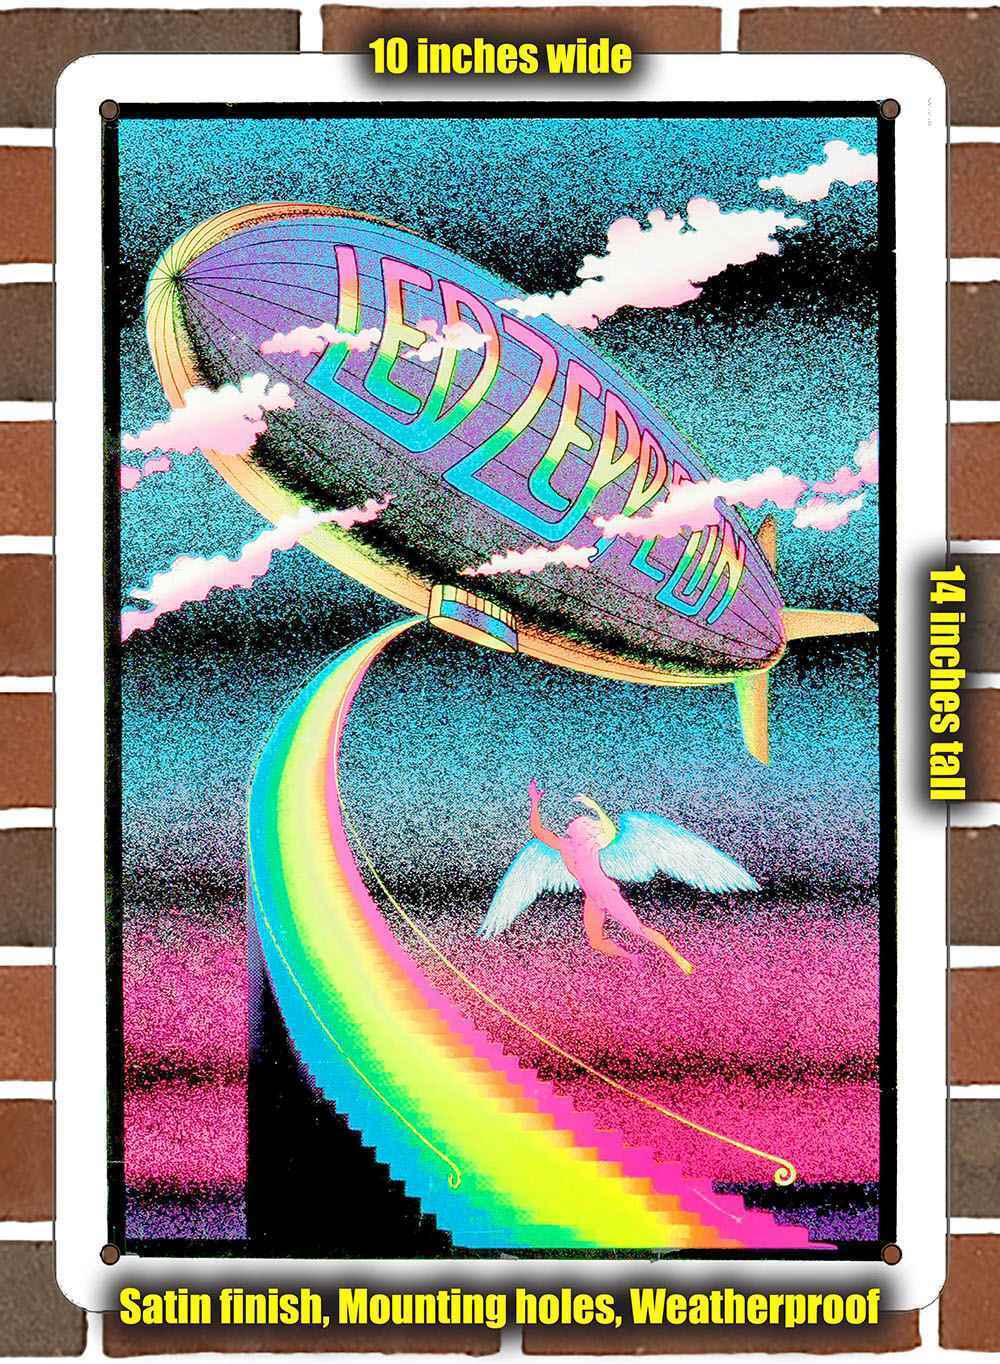 Metal Sign - 1972 Led Zeppelin Stairway- 10x14 inches